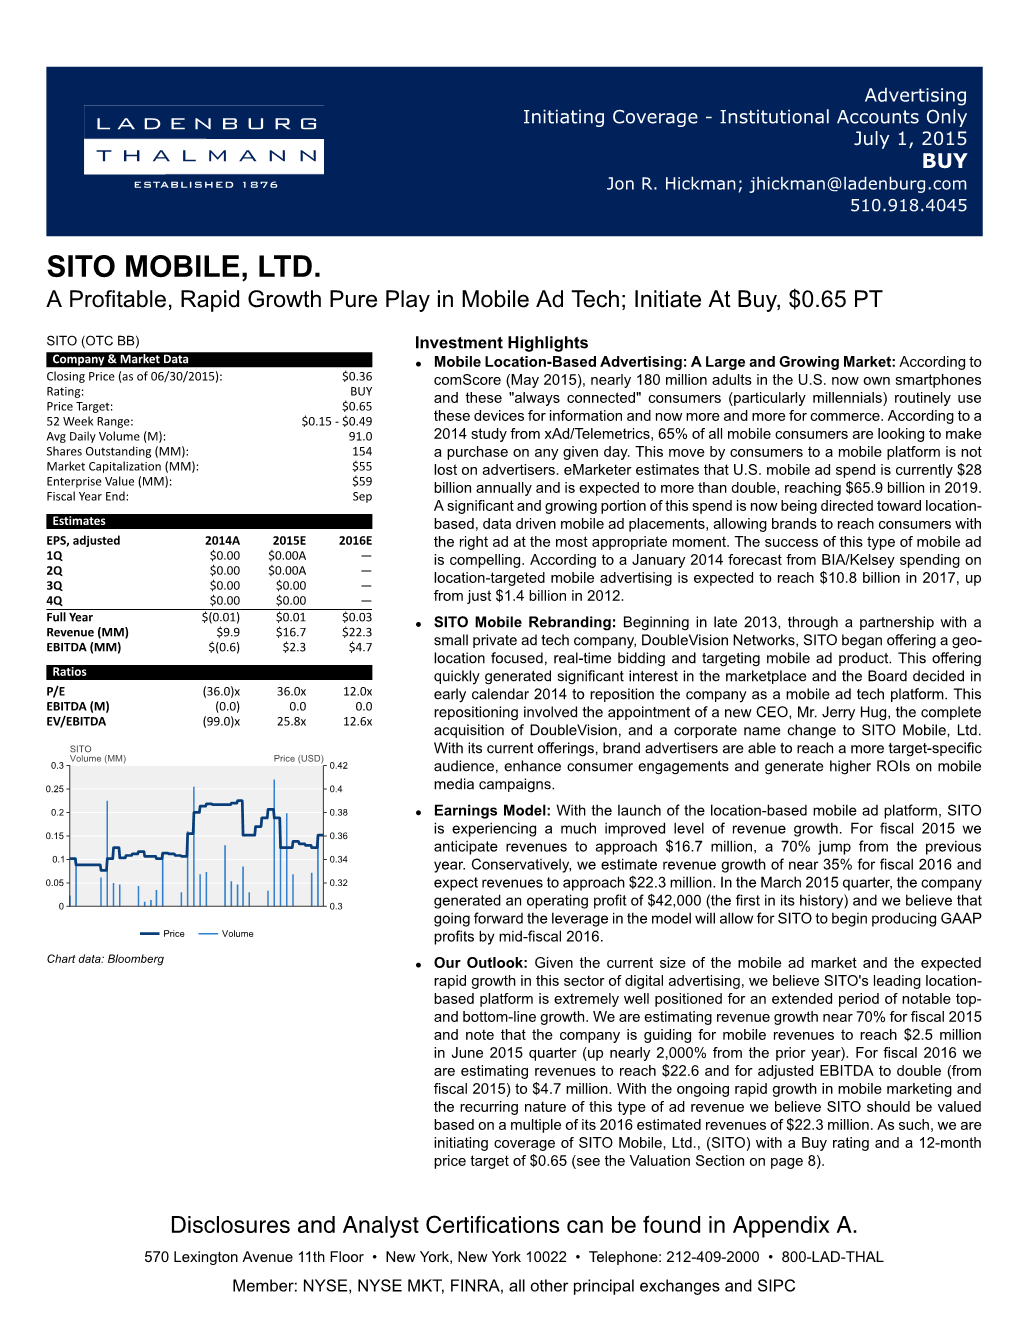 SITO MOBILE, LTD. a Profitable, Rapid Growth Pure Play in Mobile Ad Tech; Initiate at Buy, $0.65 PT